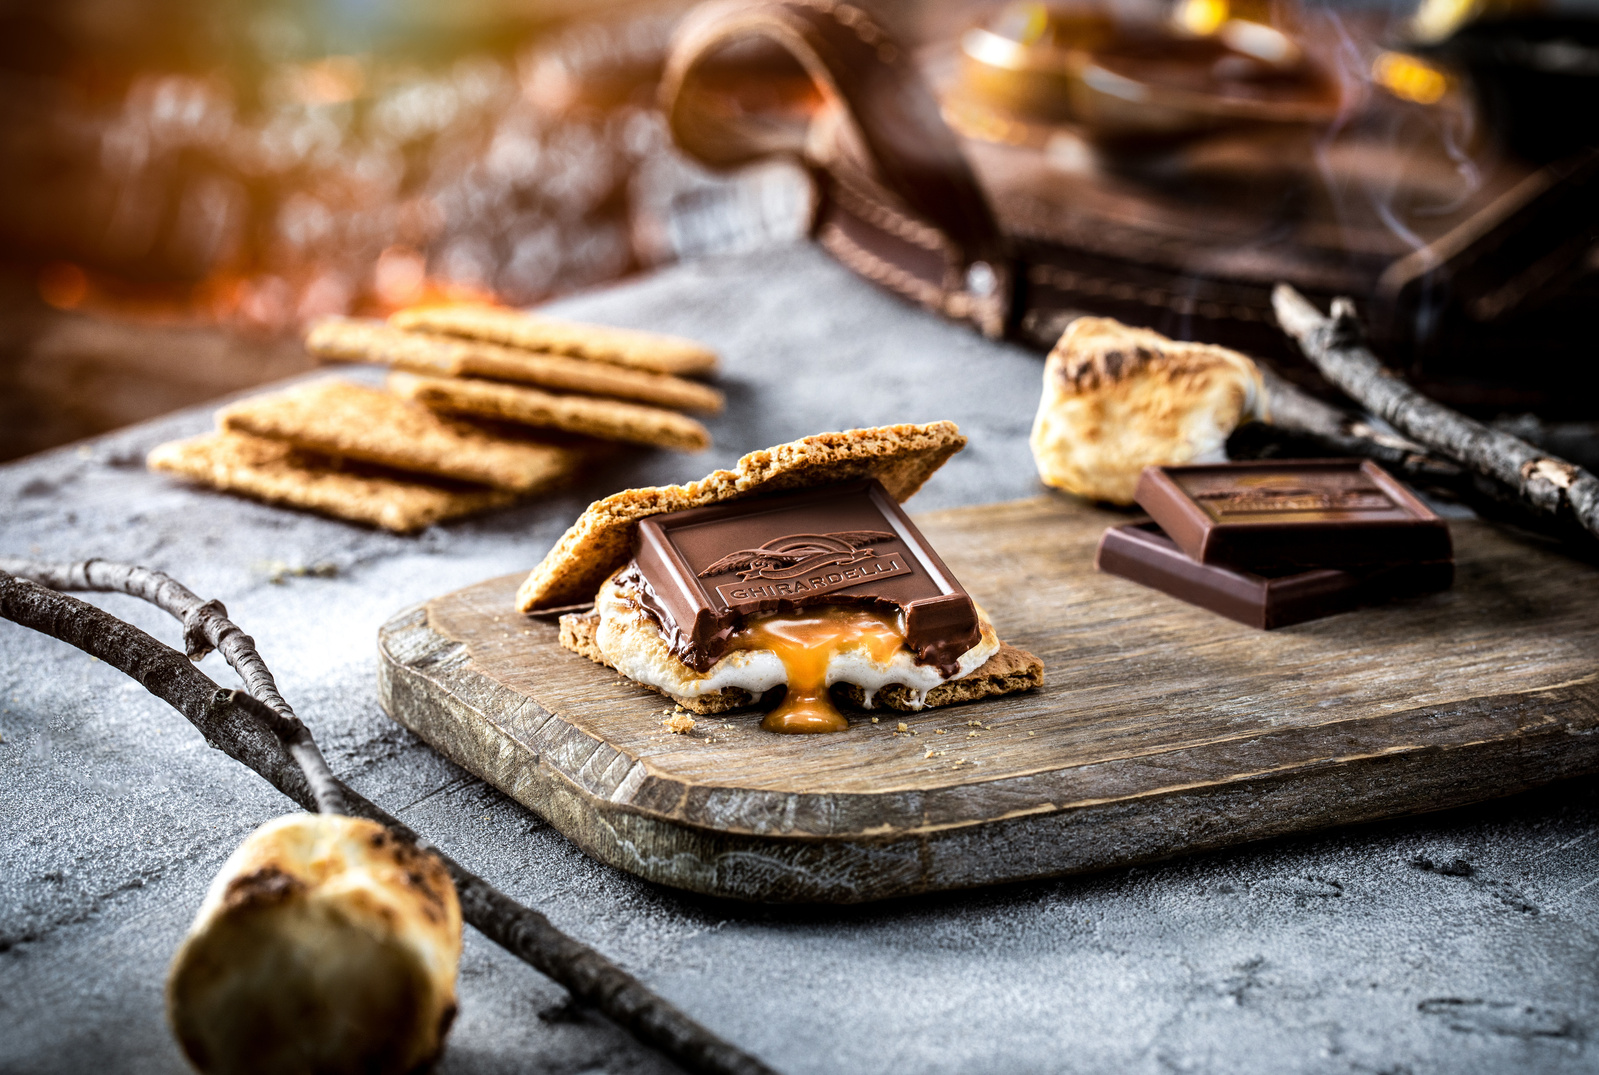 Chocolate, marshmallows, and graham crackers on a picnic table near a fire. A s'more is in the middle of the frame with a Ghirardelli caramel chocolate dripping down. Chocolate photography ad.